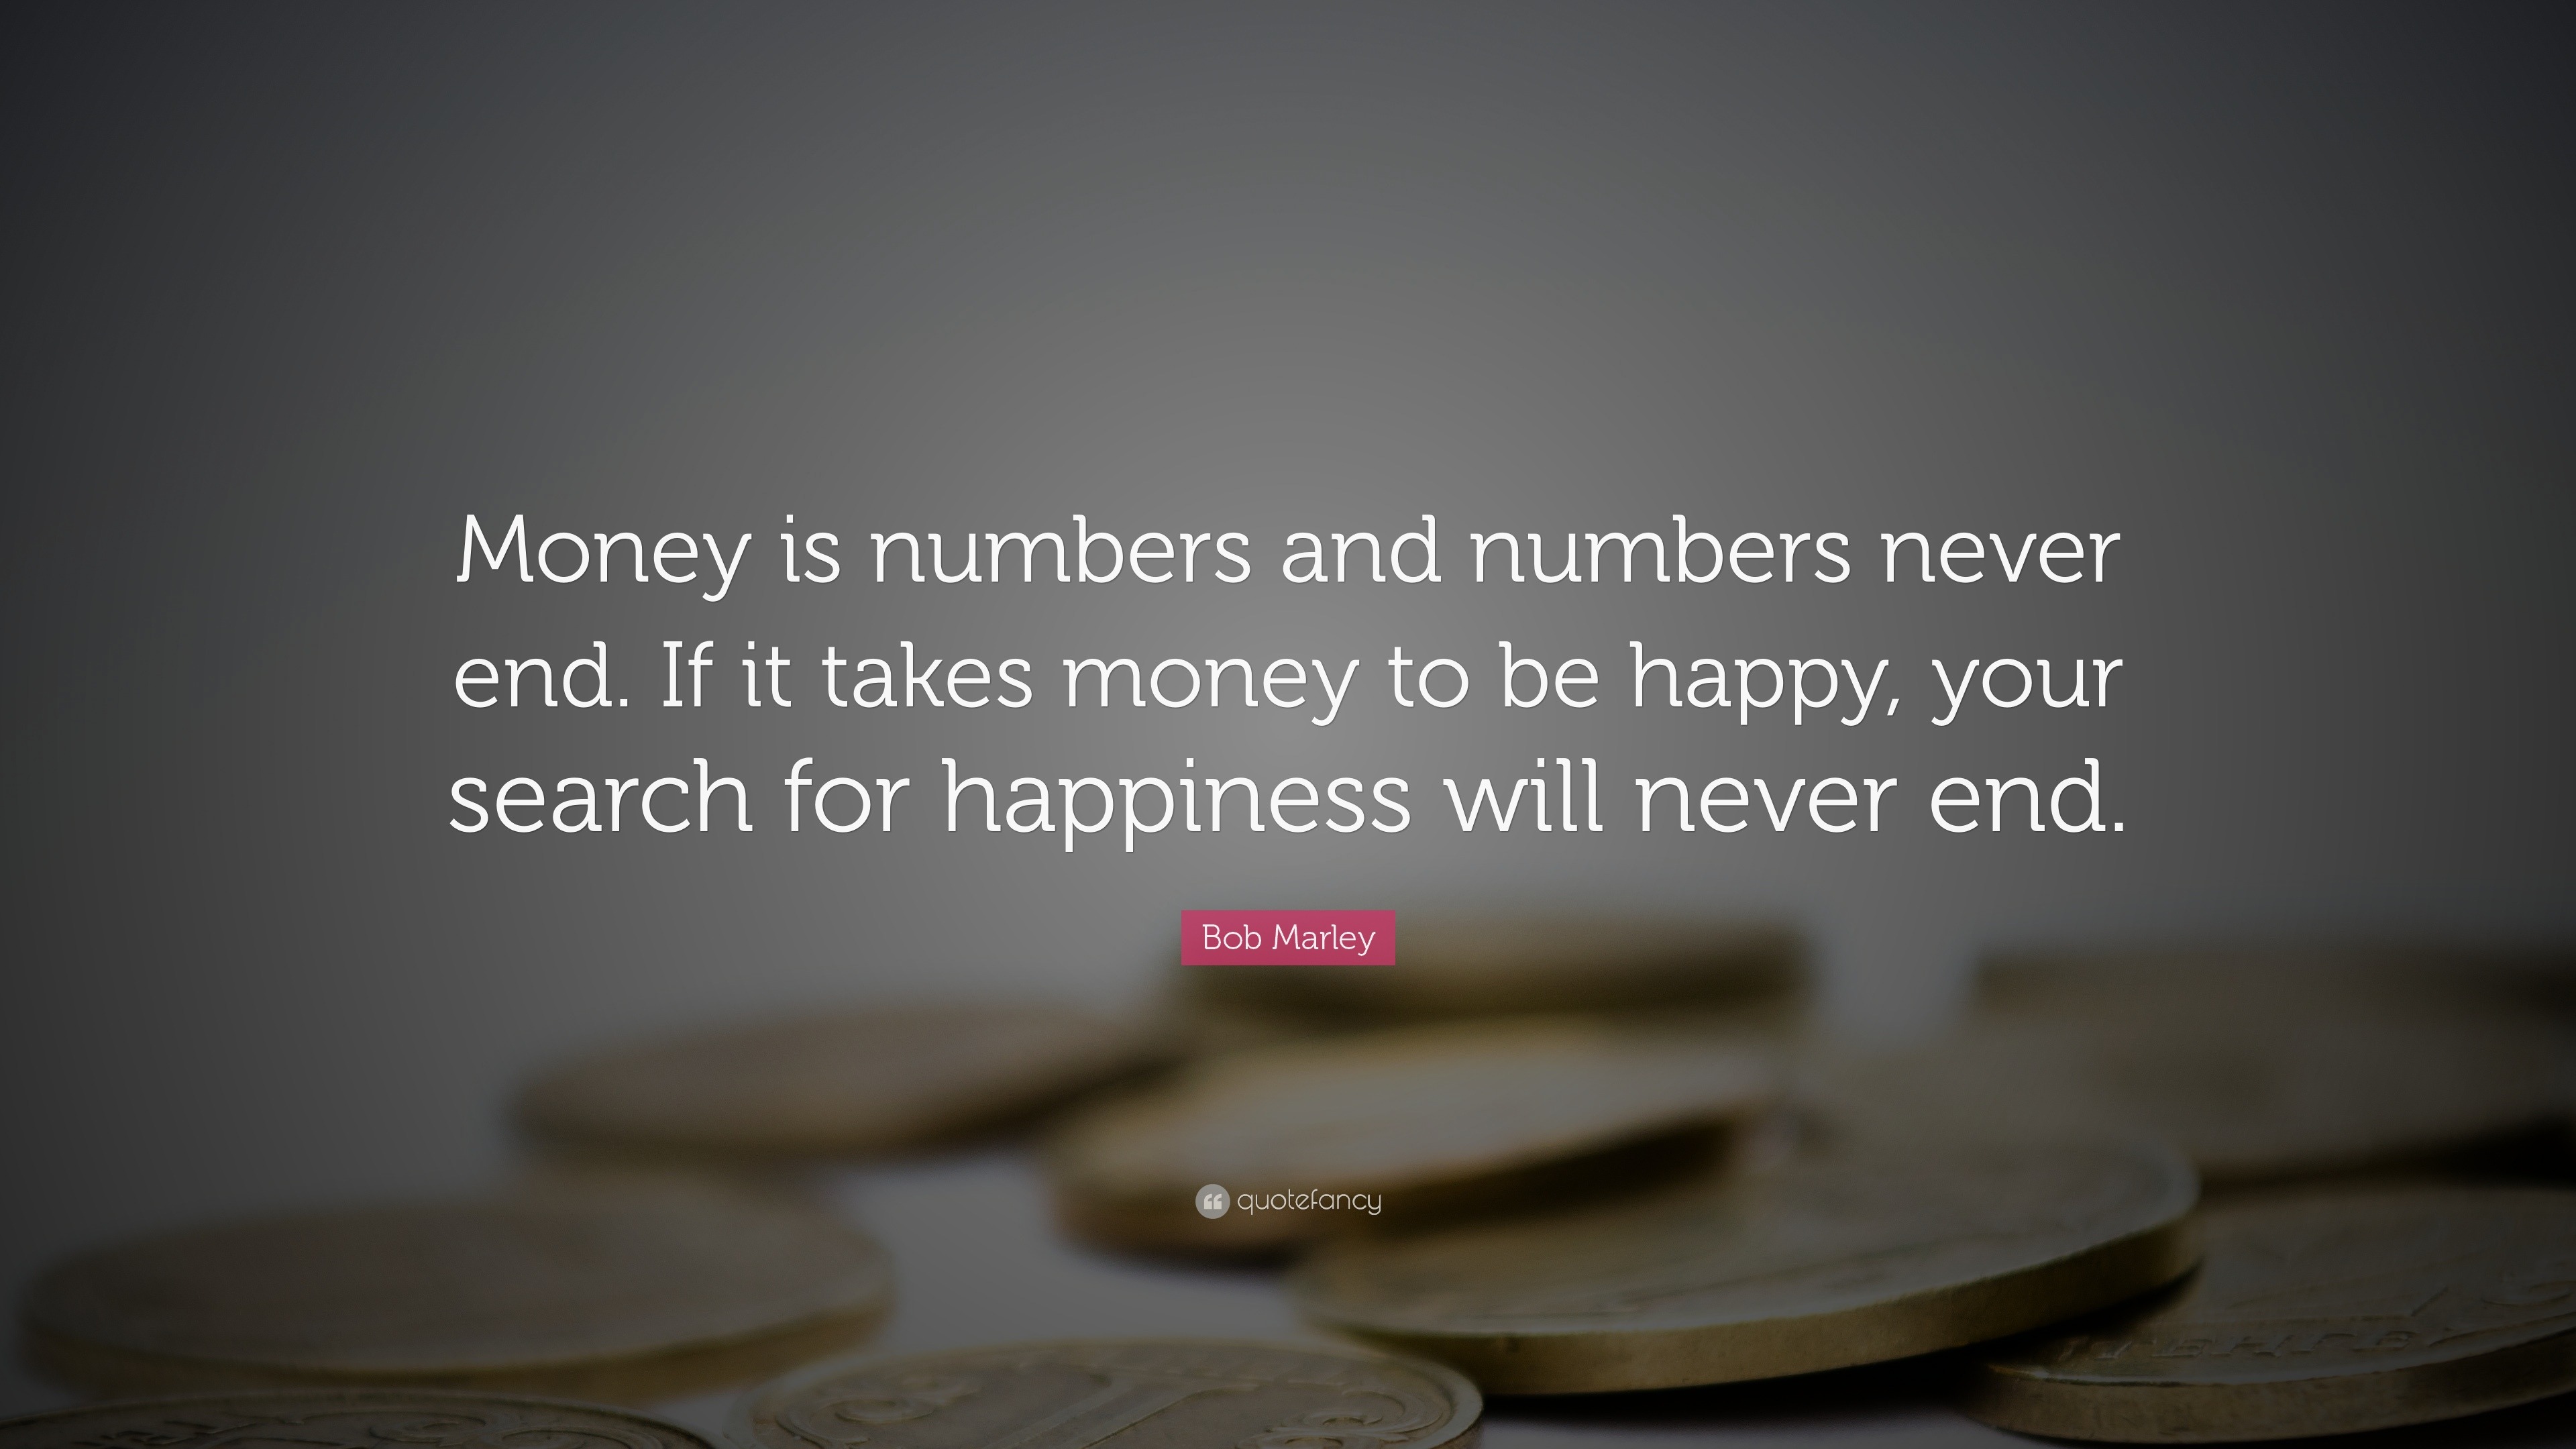 Bob Marley Quote “Money is numbers and numbers never end If it takes